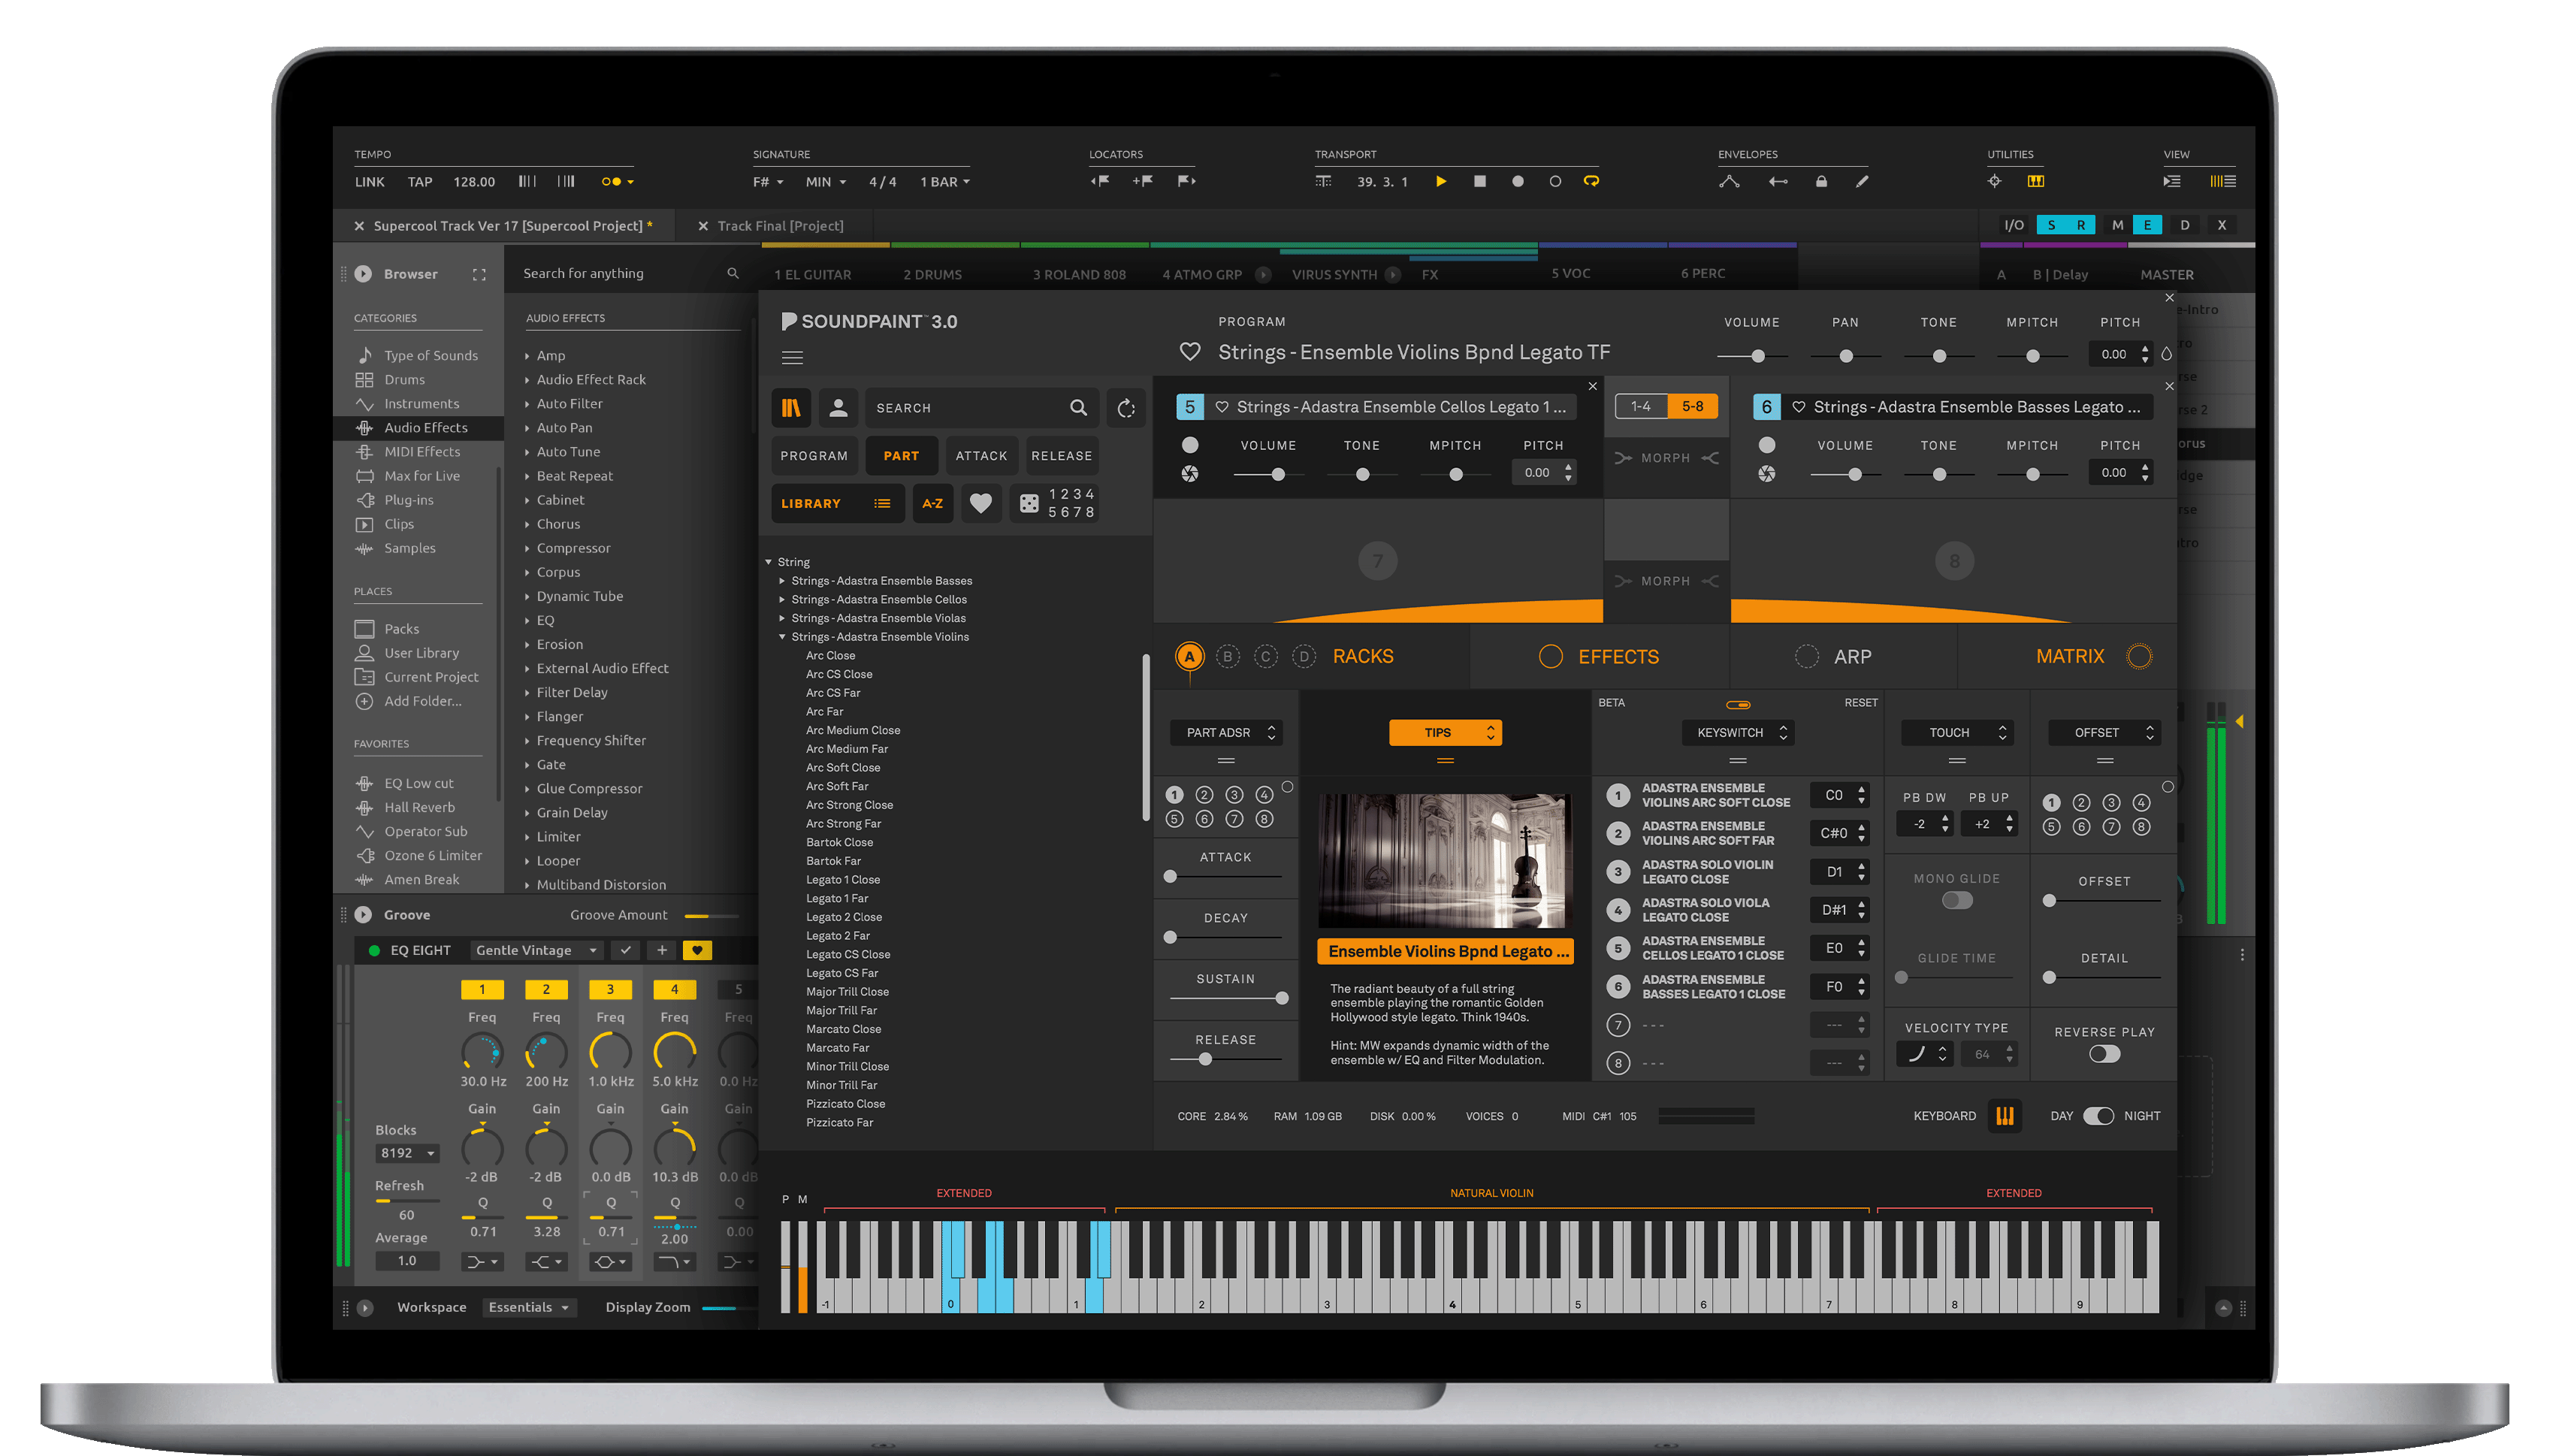 What's New In Soundpaint 3.0?